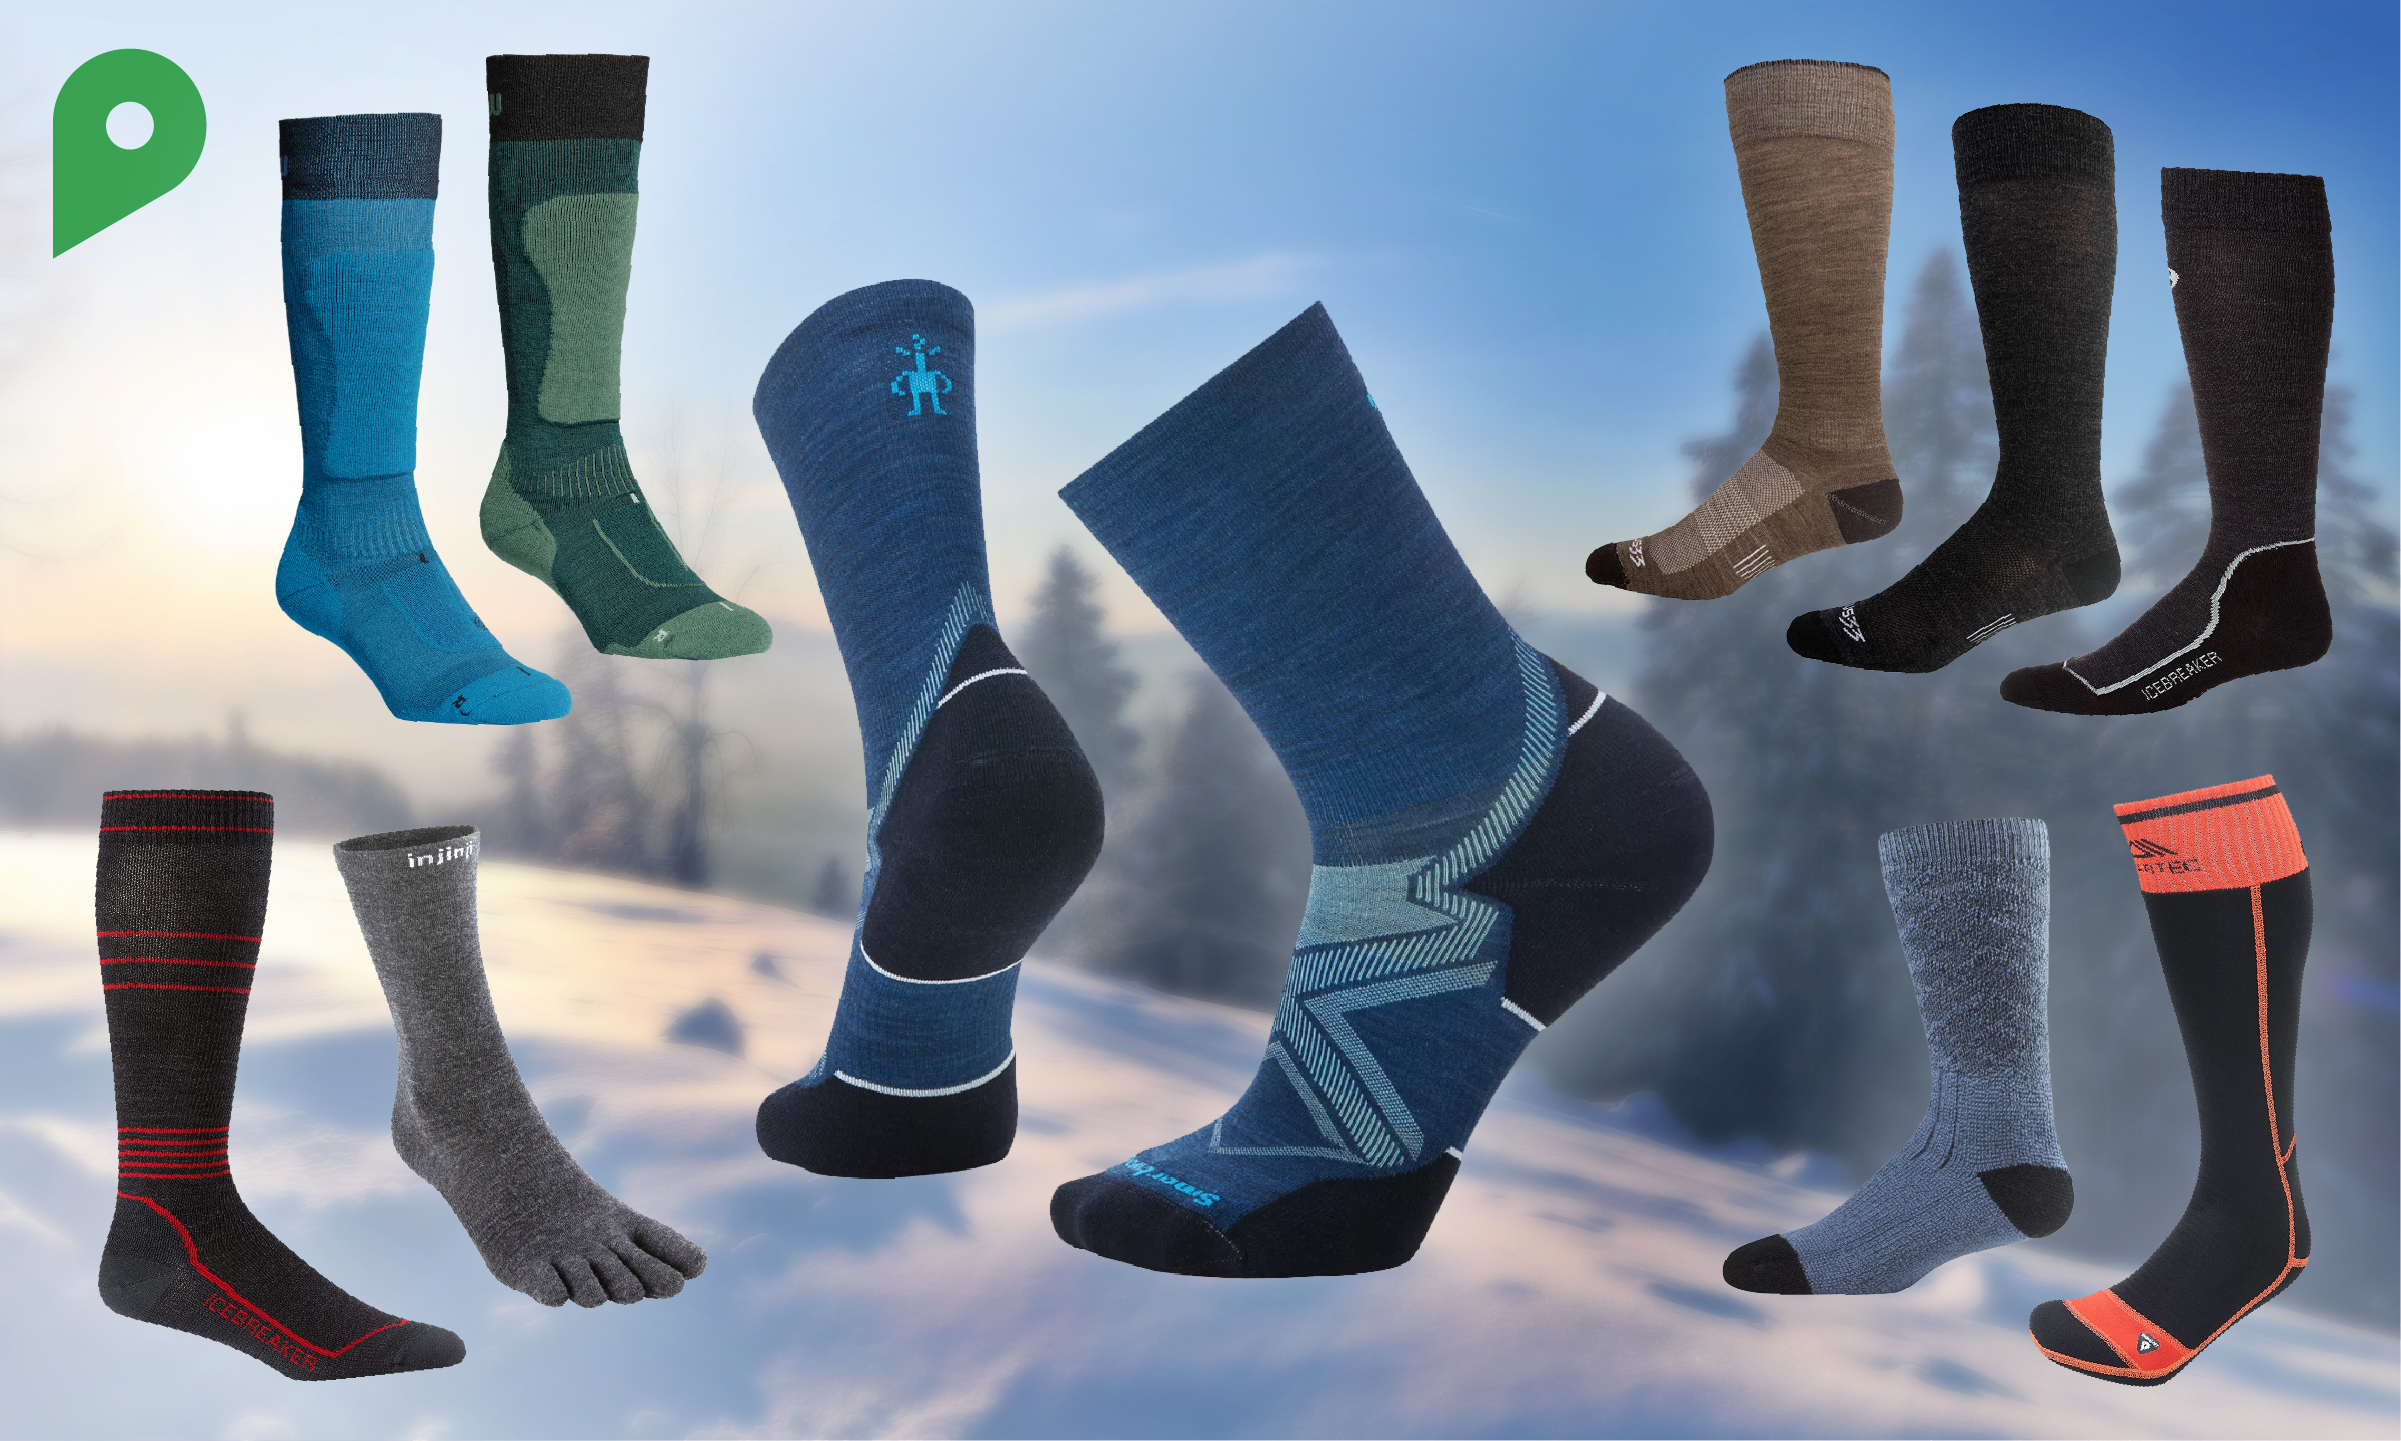 How to Layer Socks for Winter: Your Guide to Layering Socks for